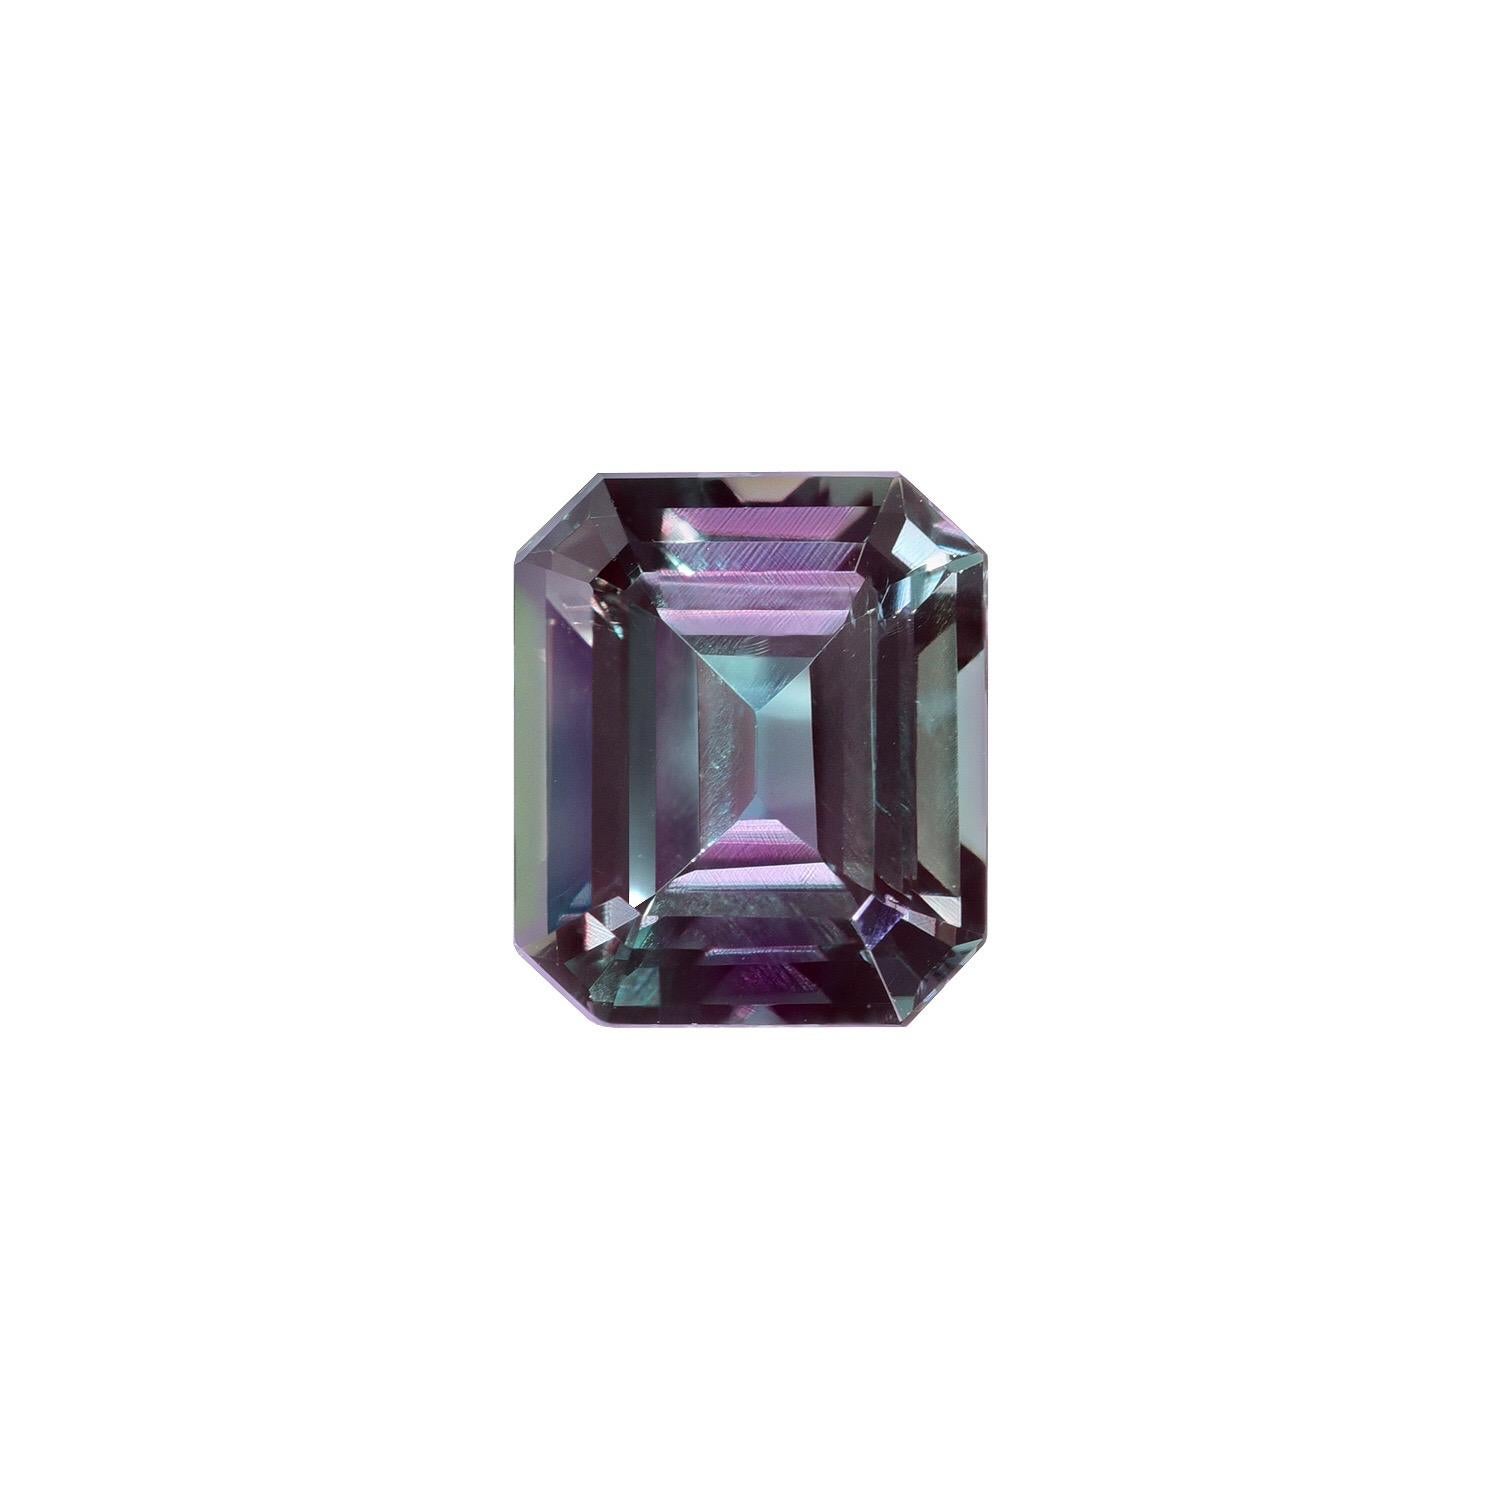 Superb 2.07 carat Brazilian Alexandrite emerald cut gem, displaying an exquisite color change. 
The GRS gem certificate is attached to the images for your reference.
Returns are accepted and paid by us within 7 days of delivery.
We offer ultra fine